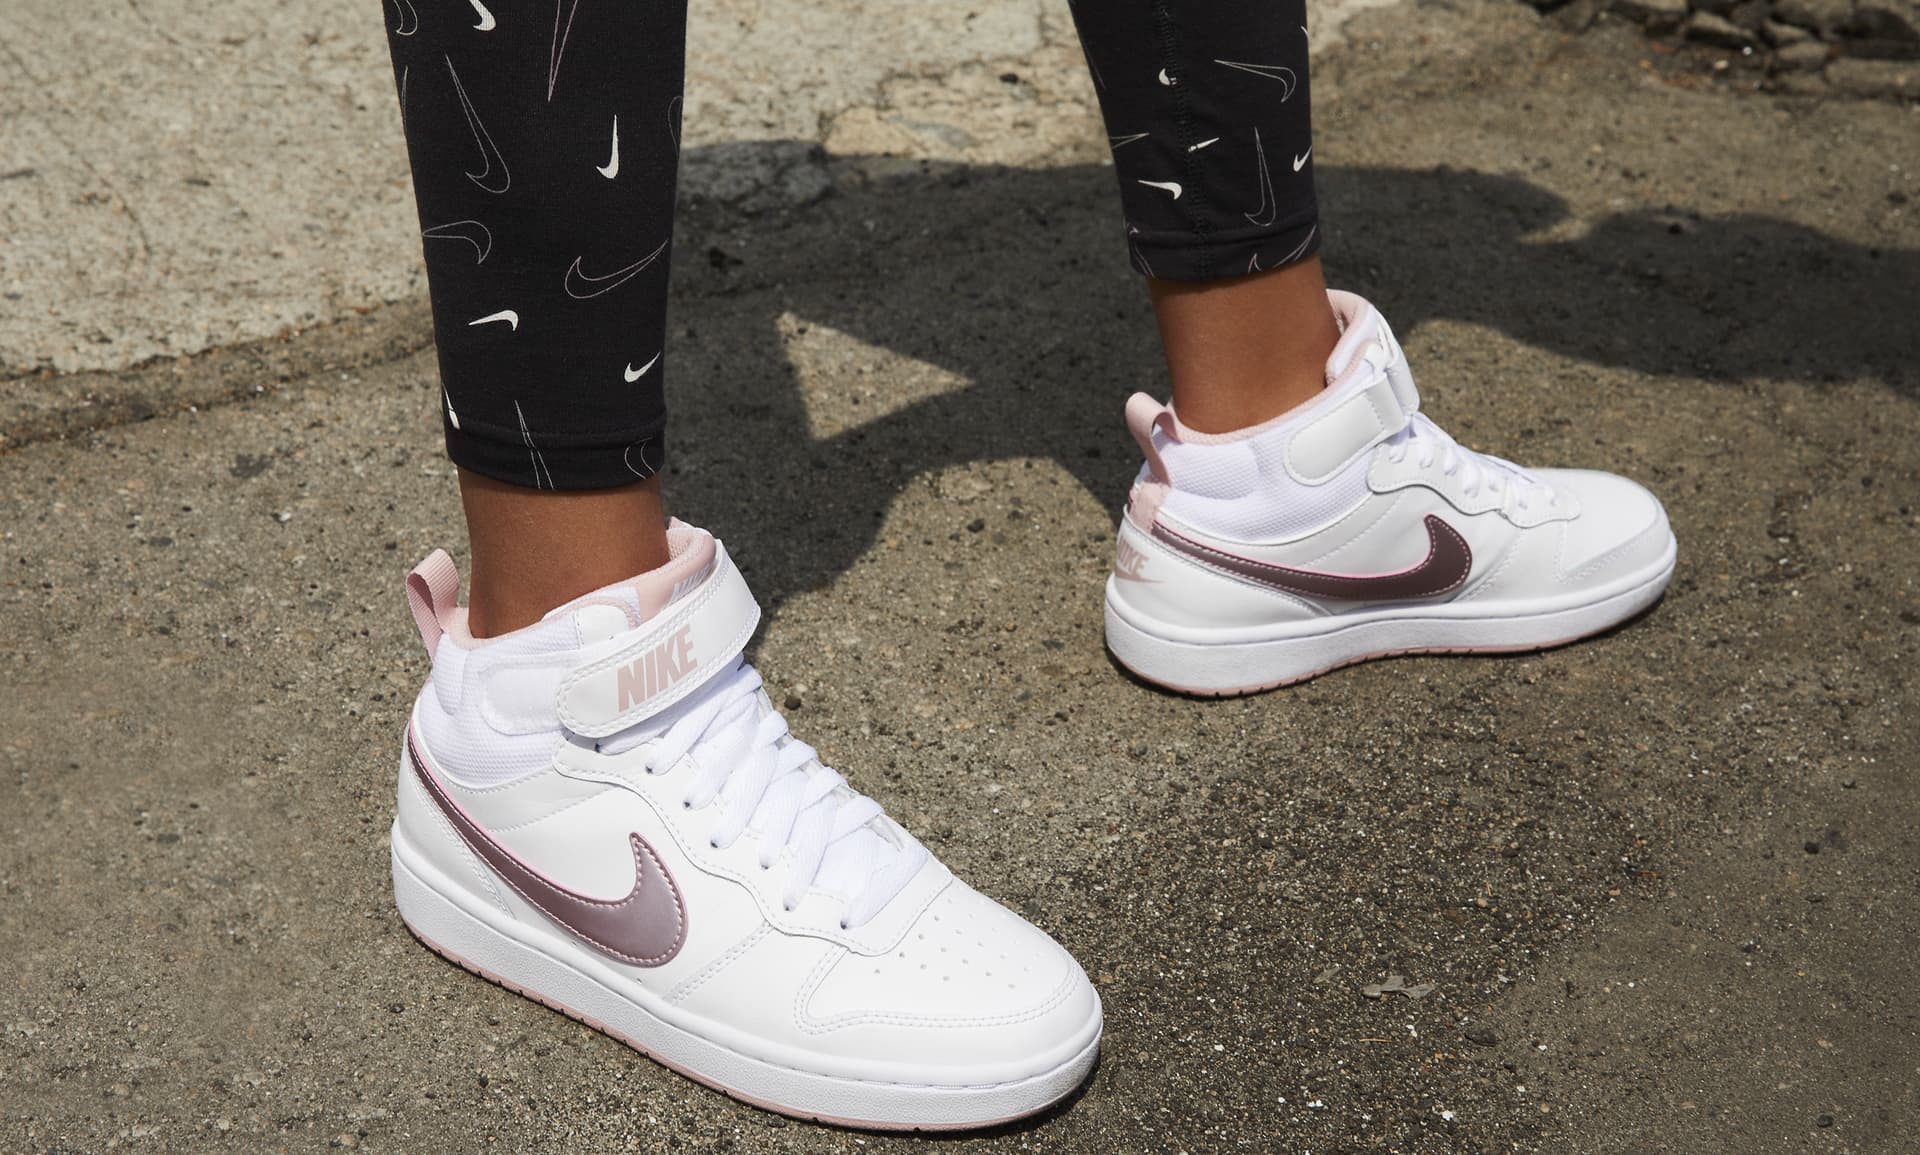 Nike Court Borough Mid Top Ladies Trainers | vlr.eng.br